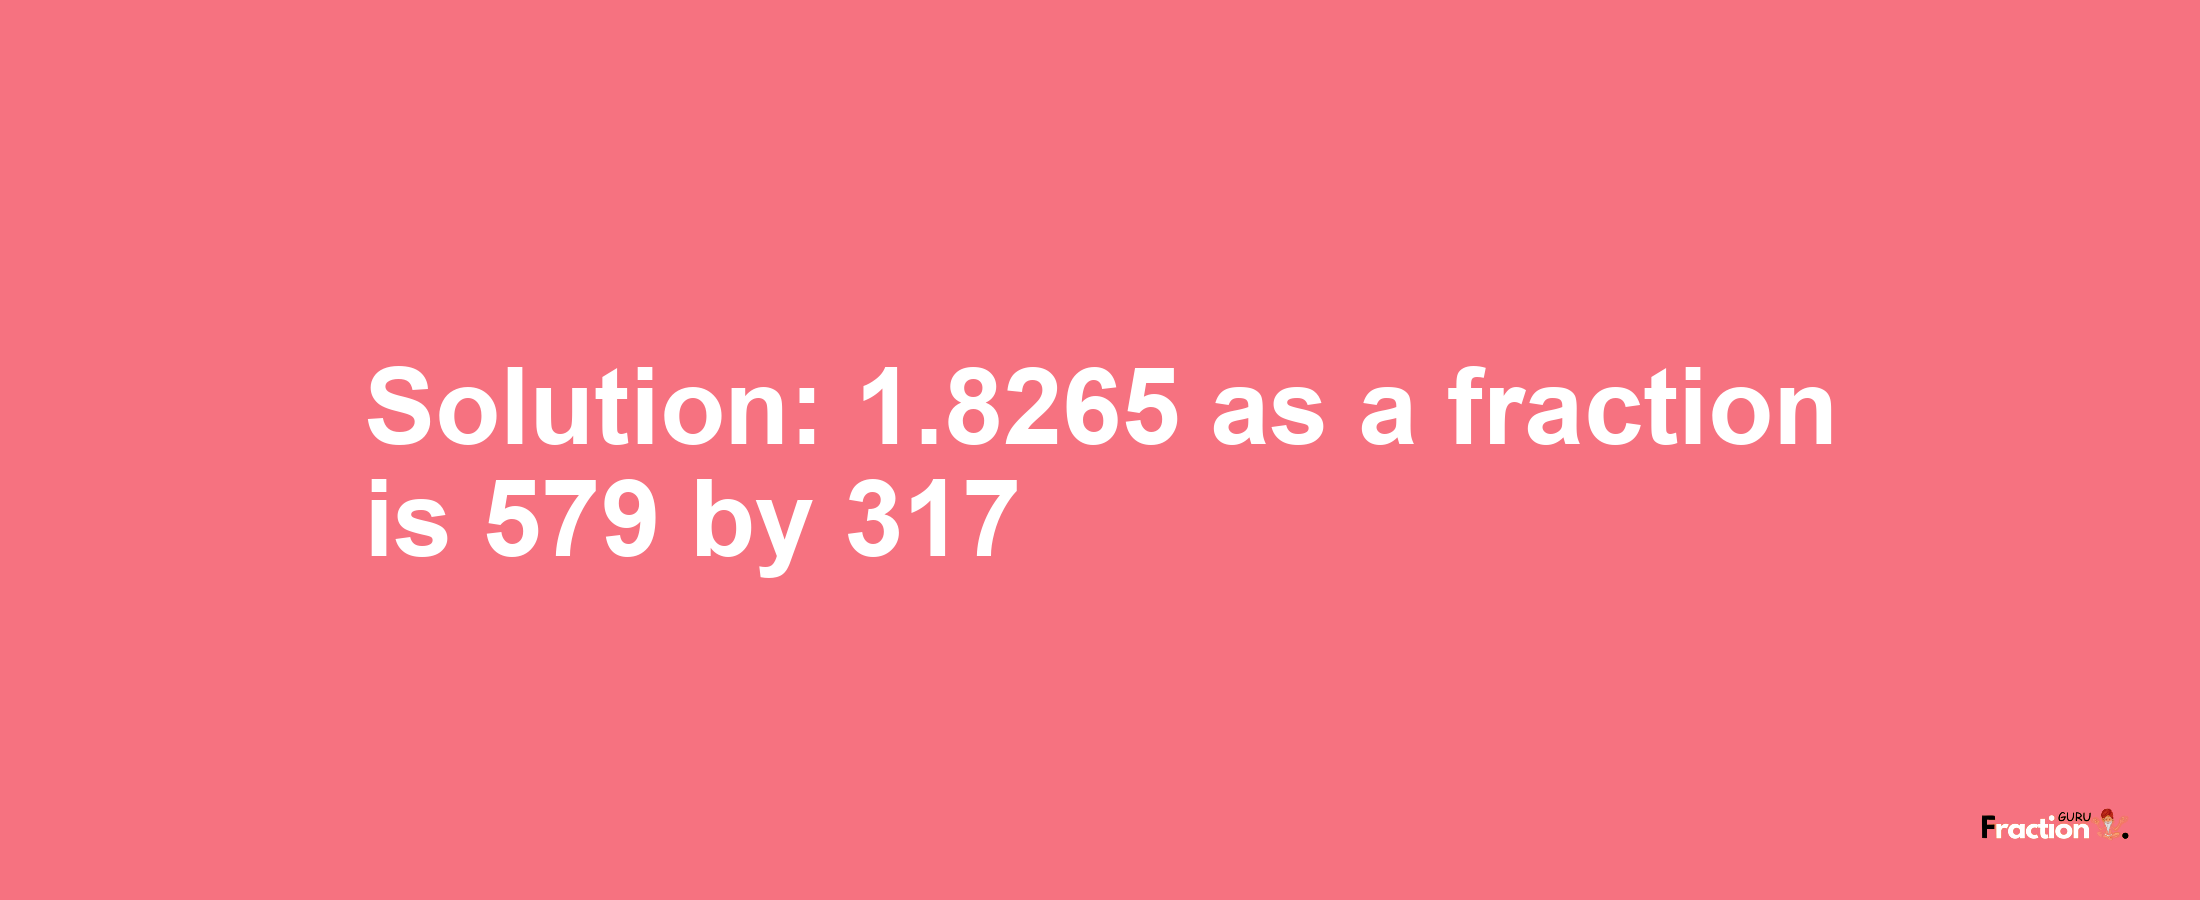 Solution:1.8265 as a fraction is 579/317